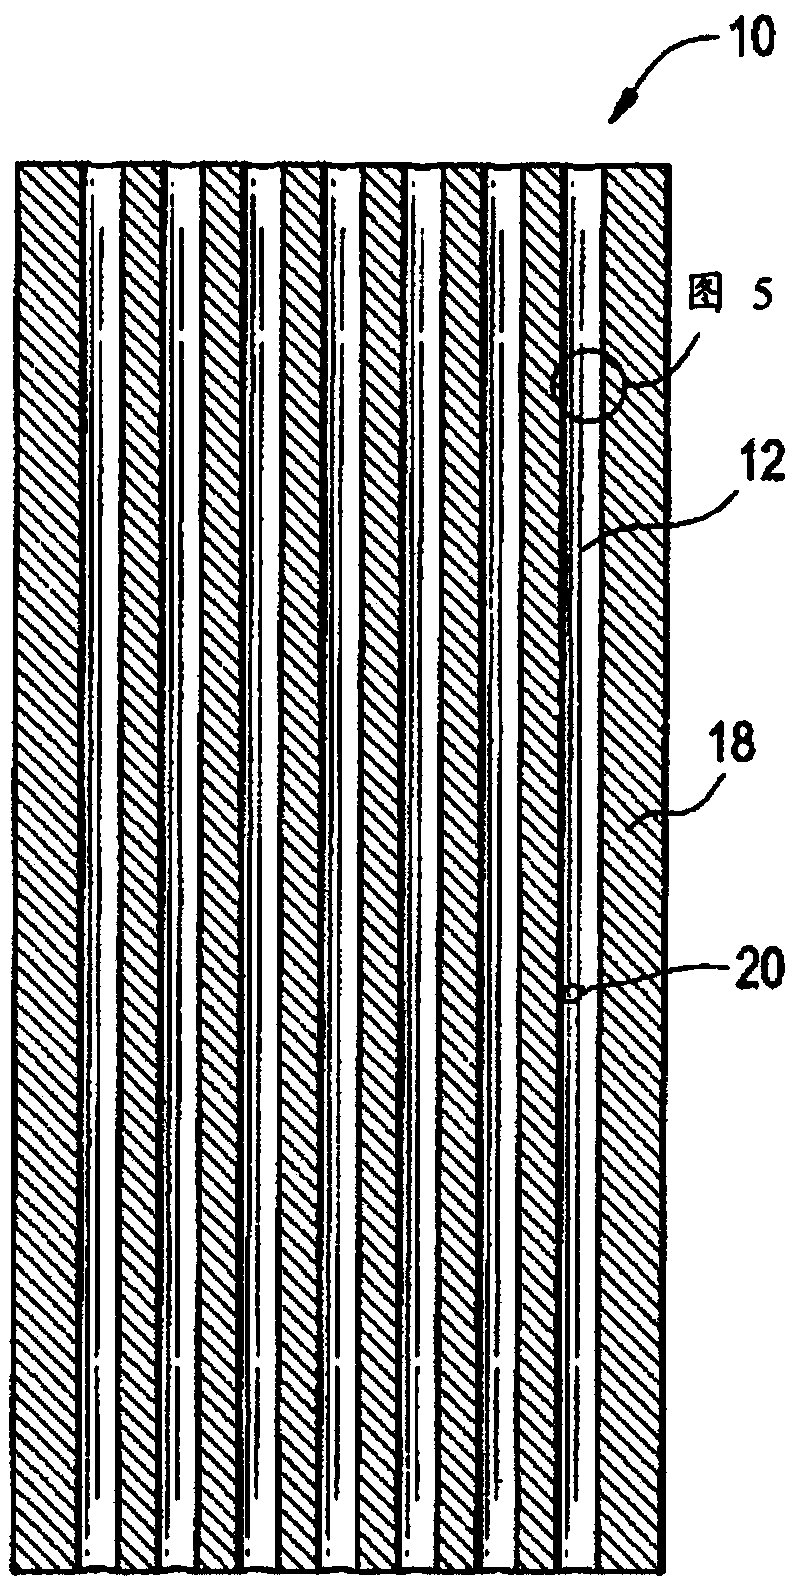 Microcapillary films containing phase change materials